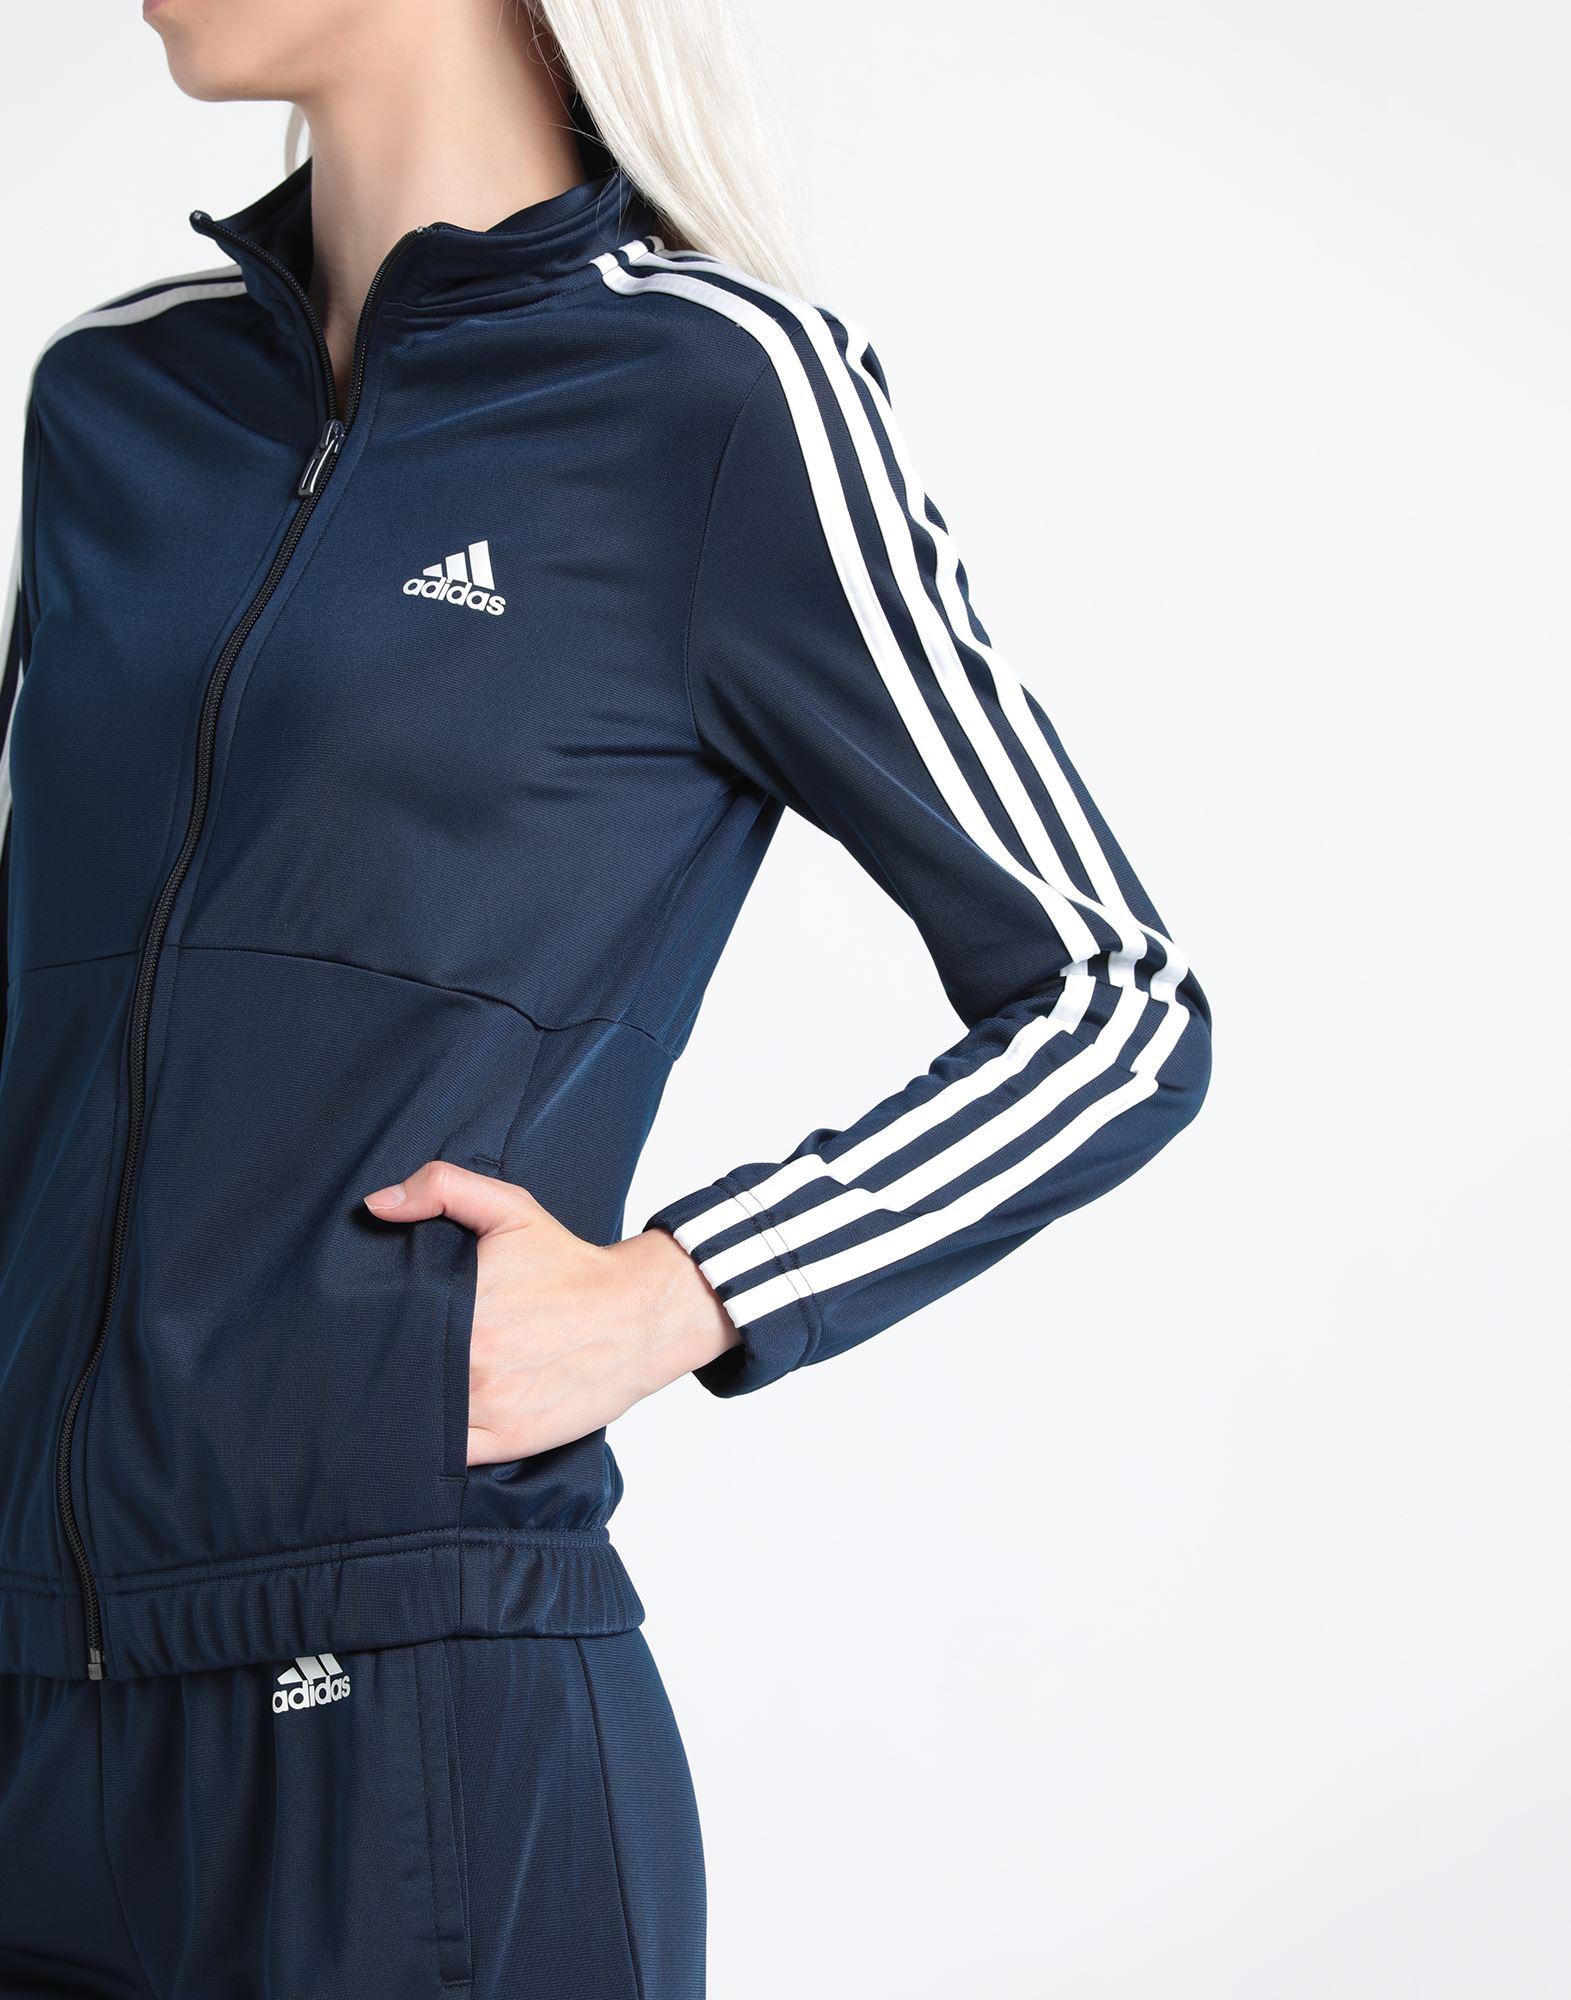 navy adidas tracksuit, huge discount Save 73% - www.phraepao.go.th